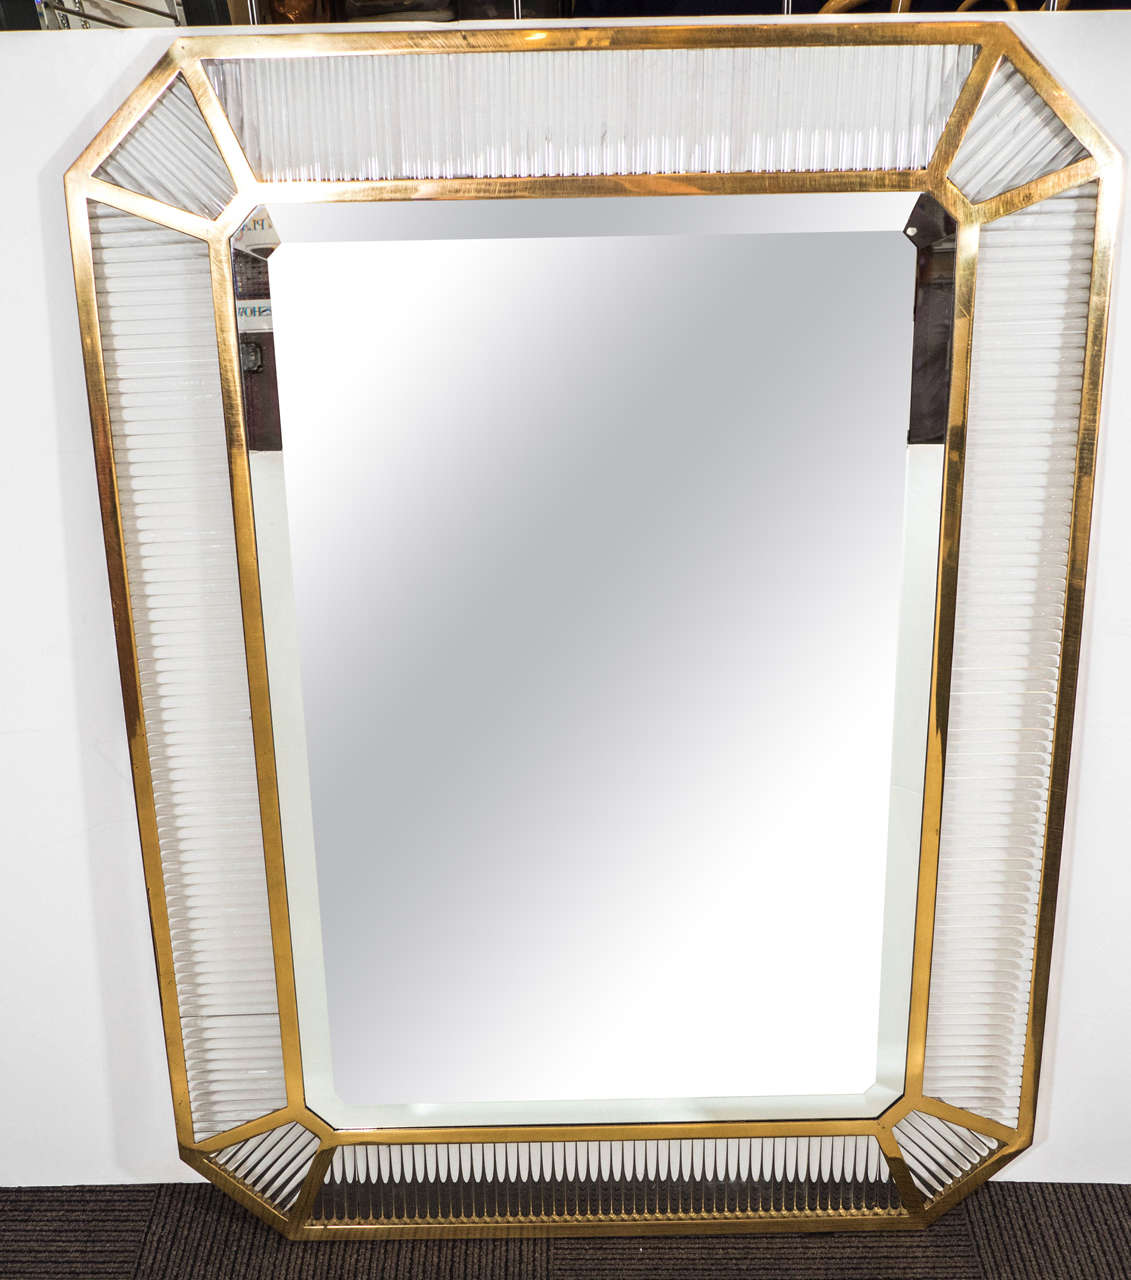 Incredible and Substantial High End Solid Glass Rod Design Beveled Mirror that can be displayed Vertically or Horizontally upon the Wall.Well Constructed with the weight of High Quality.Amazing and Beautiful,it combines The Drama of Art Deco and